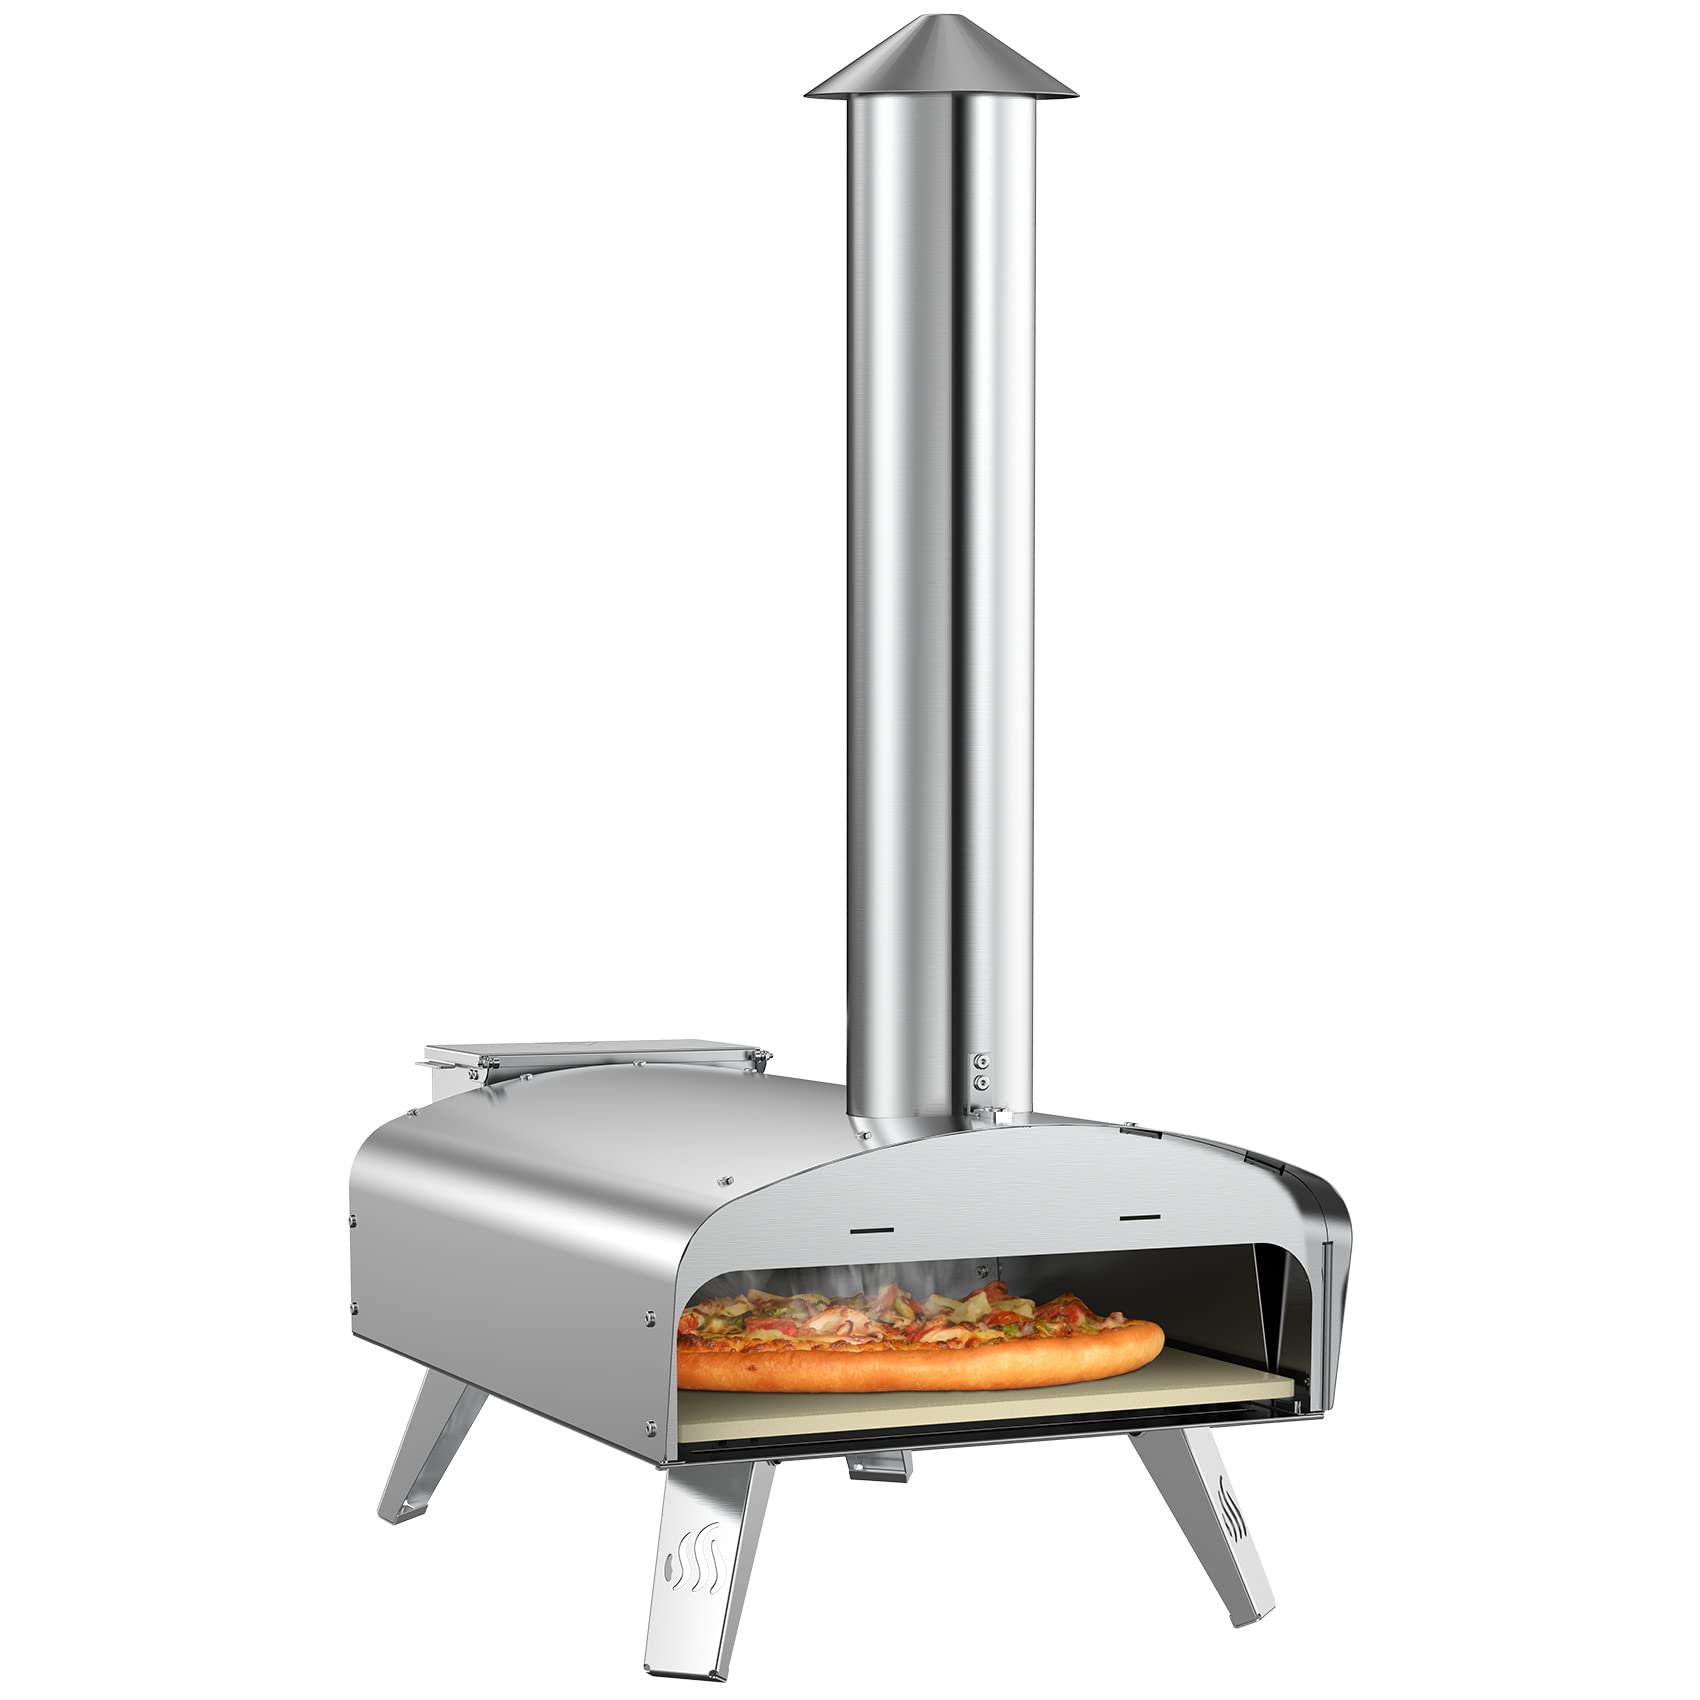 Mimiuo Outdoor Pizza Ovens Wood Pellet Pizza Oven Portable Stainless Steel Wood Fired Pizza Stove with 13